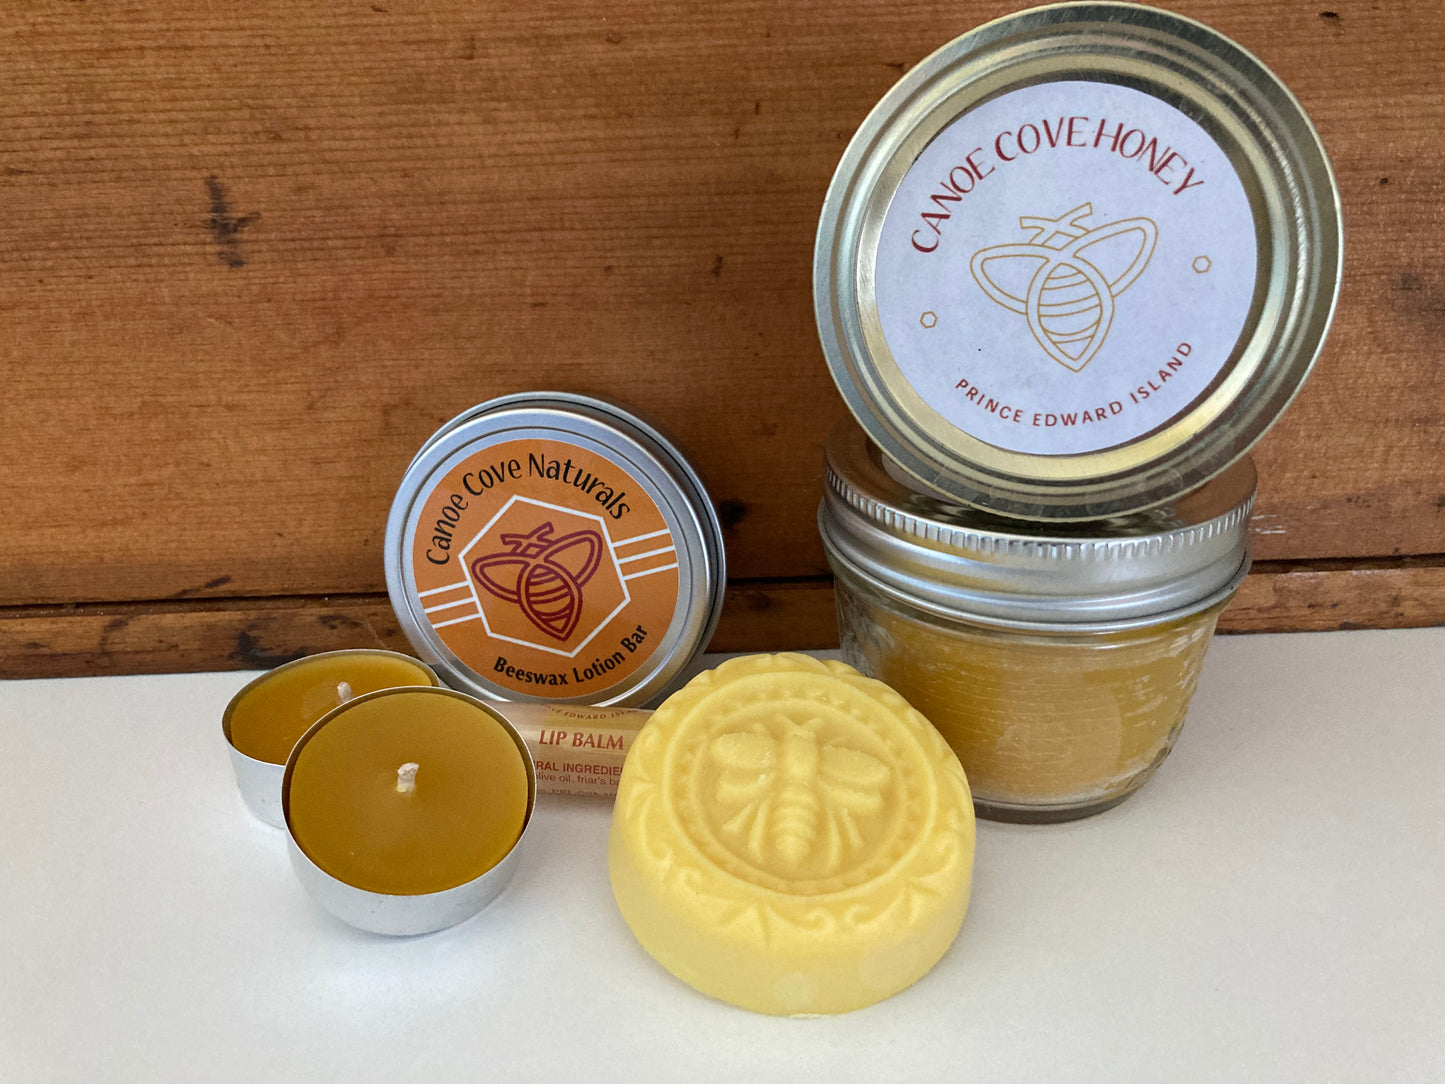 Beeswax Canoe Cove LUXURY CARE KIT, with 2 Tealight Candles - EcoHome